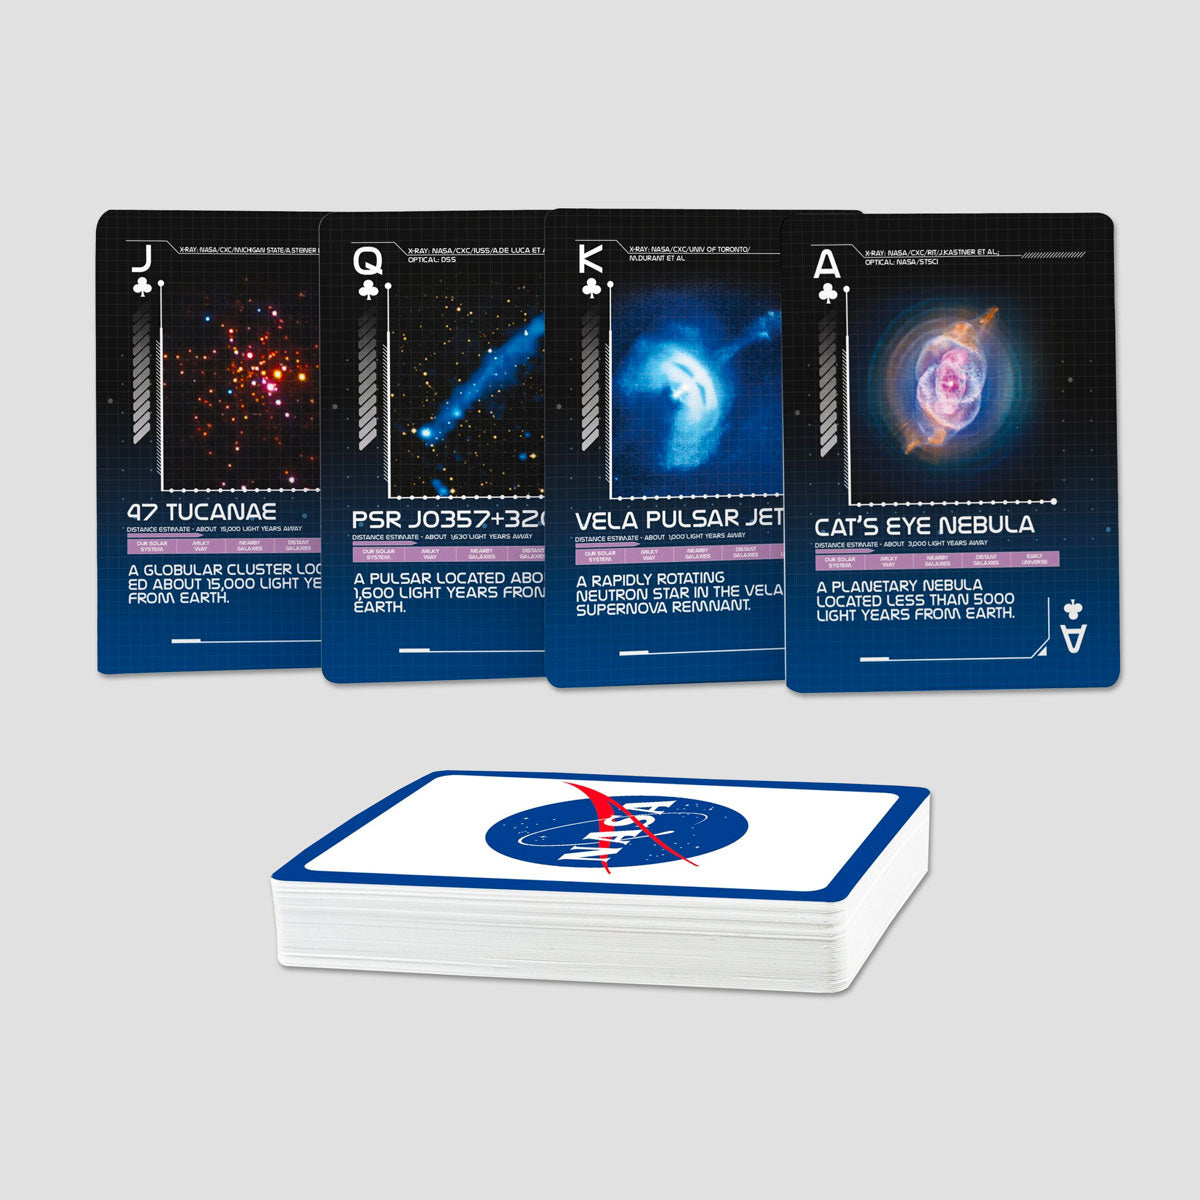 NASA Across the Universe Playing Cards